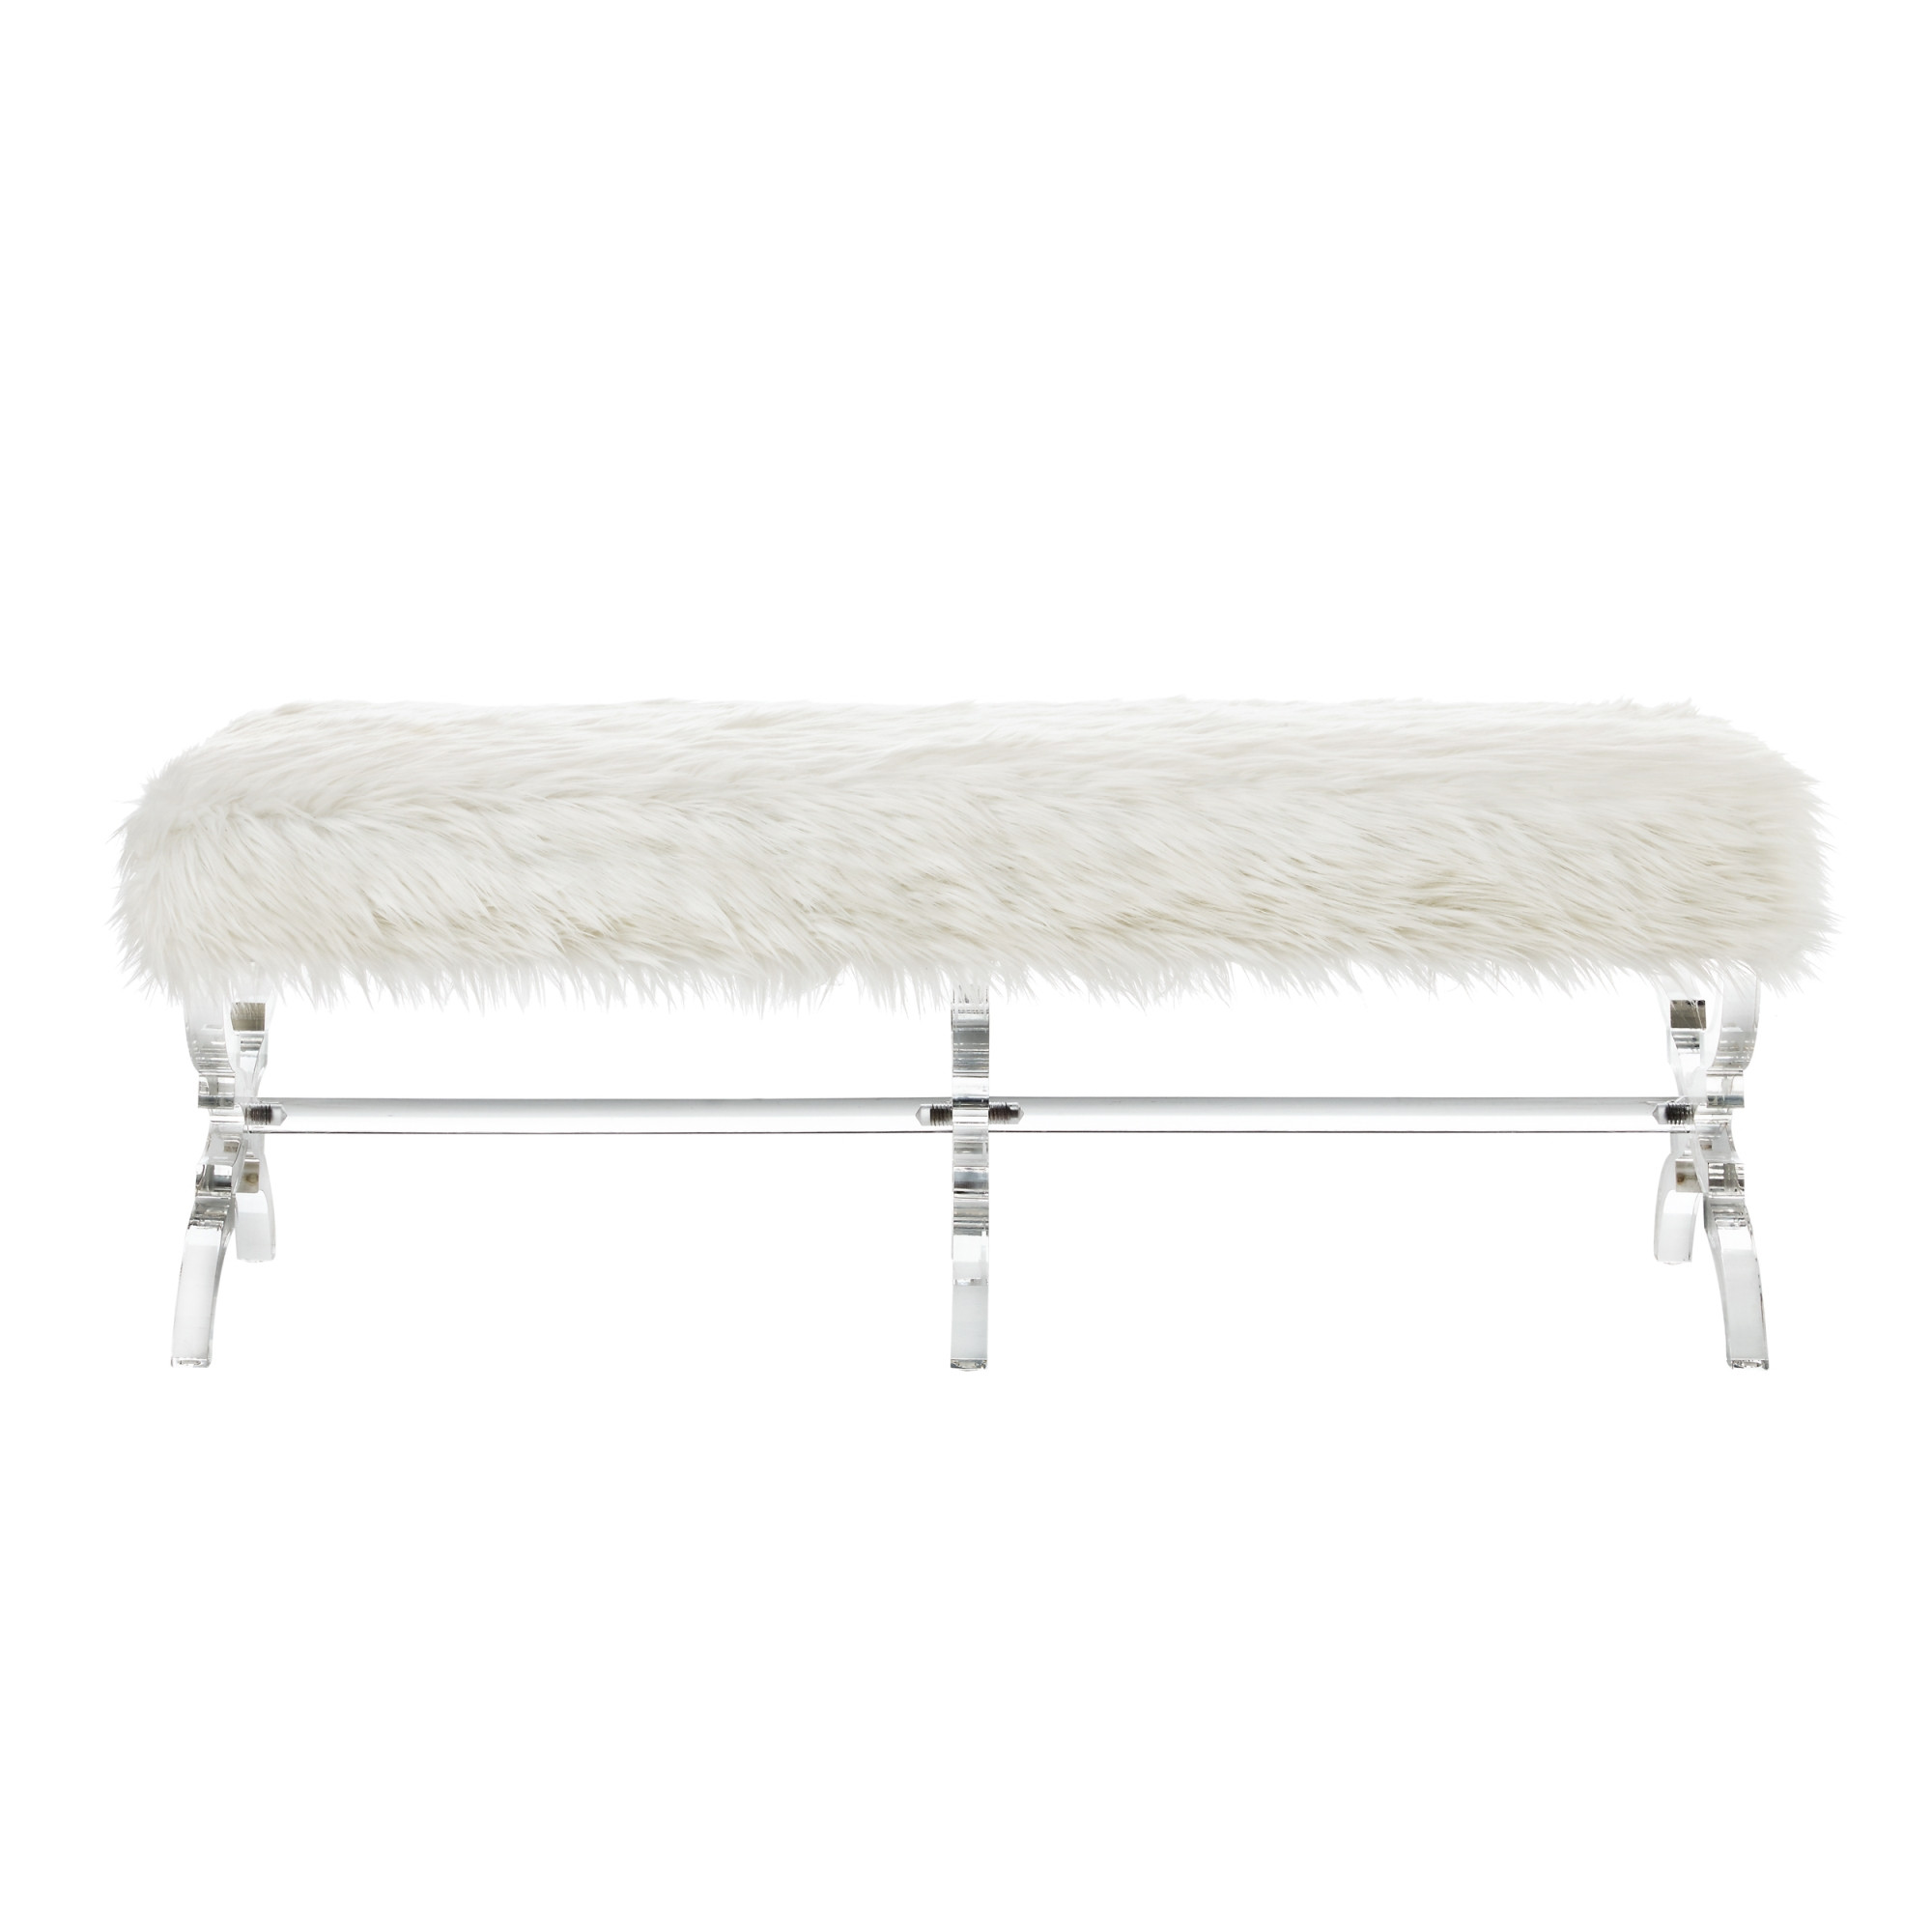 48" Cream And Clear Upholstered Faux Fur Bench-490868-1